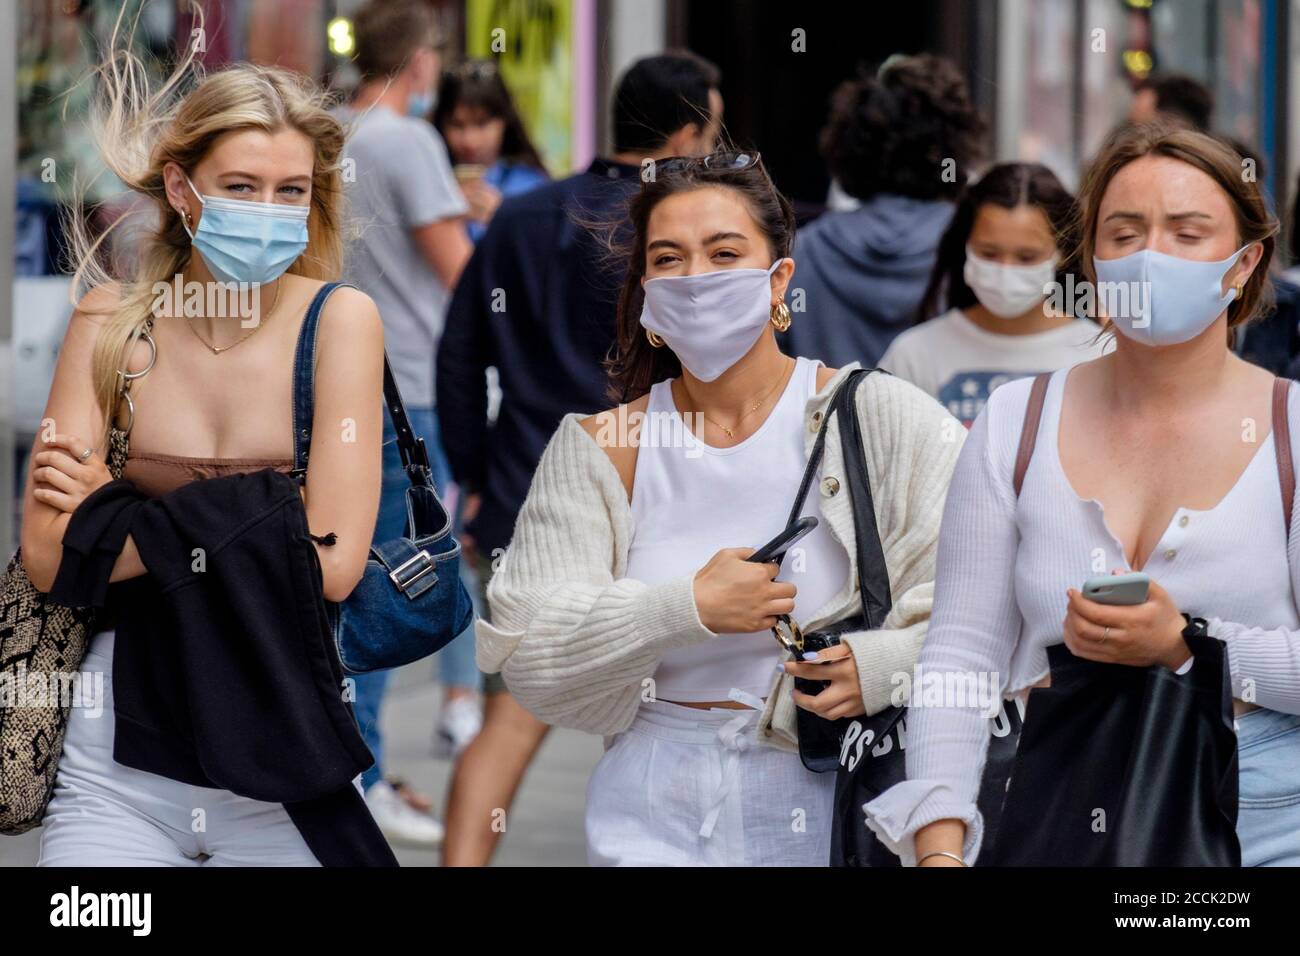 Young women wearing face coverings on busy street, London, UK Stock Photo